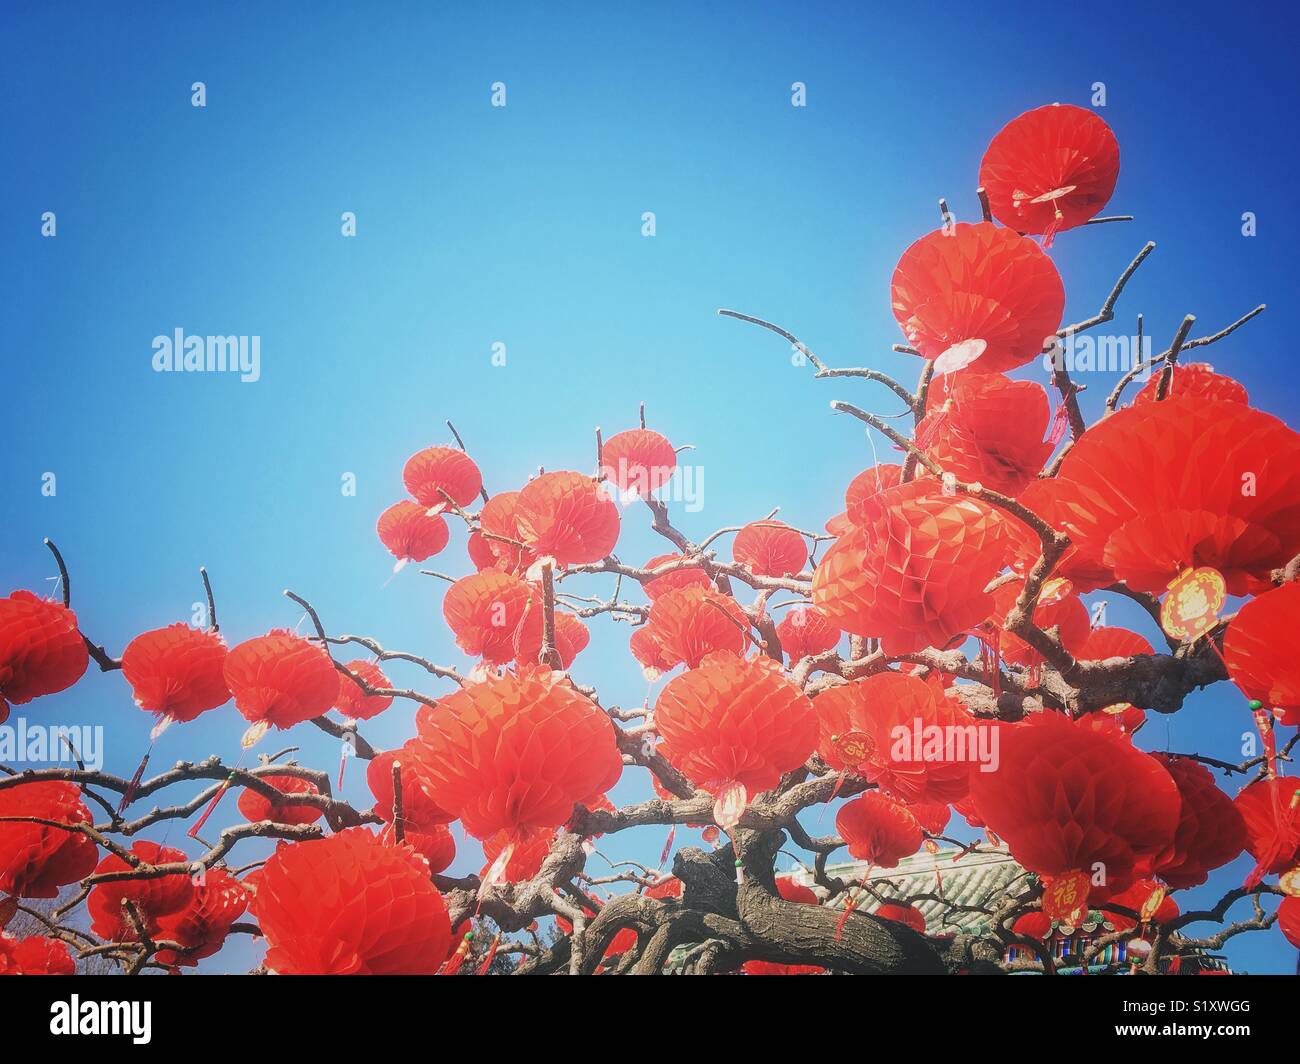 Red lanterns on a tree. Traditional decoration of Lunar New Year. Stock Photo